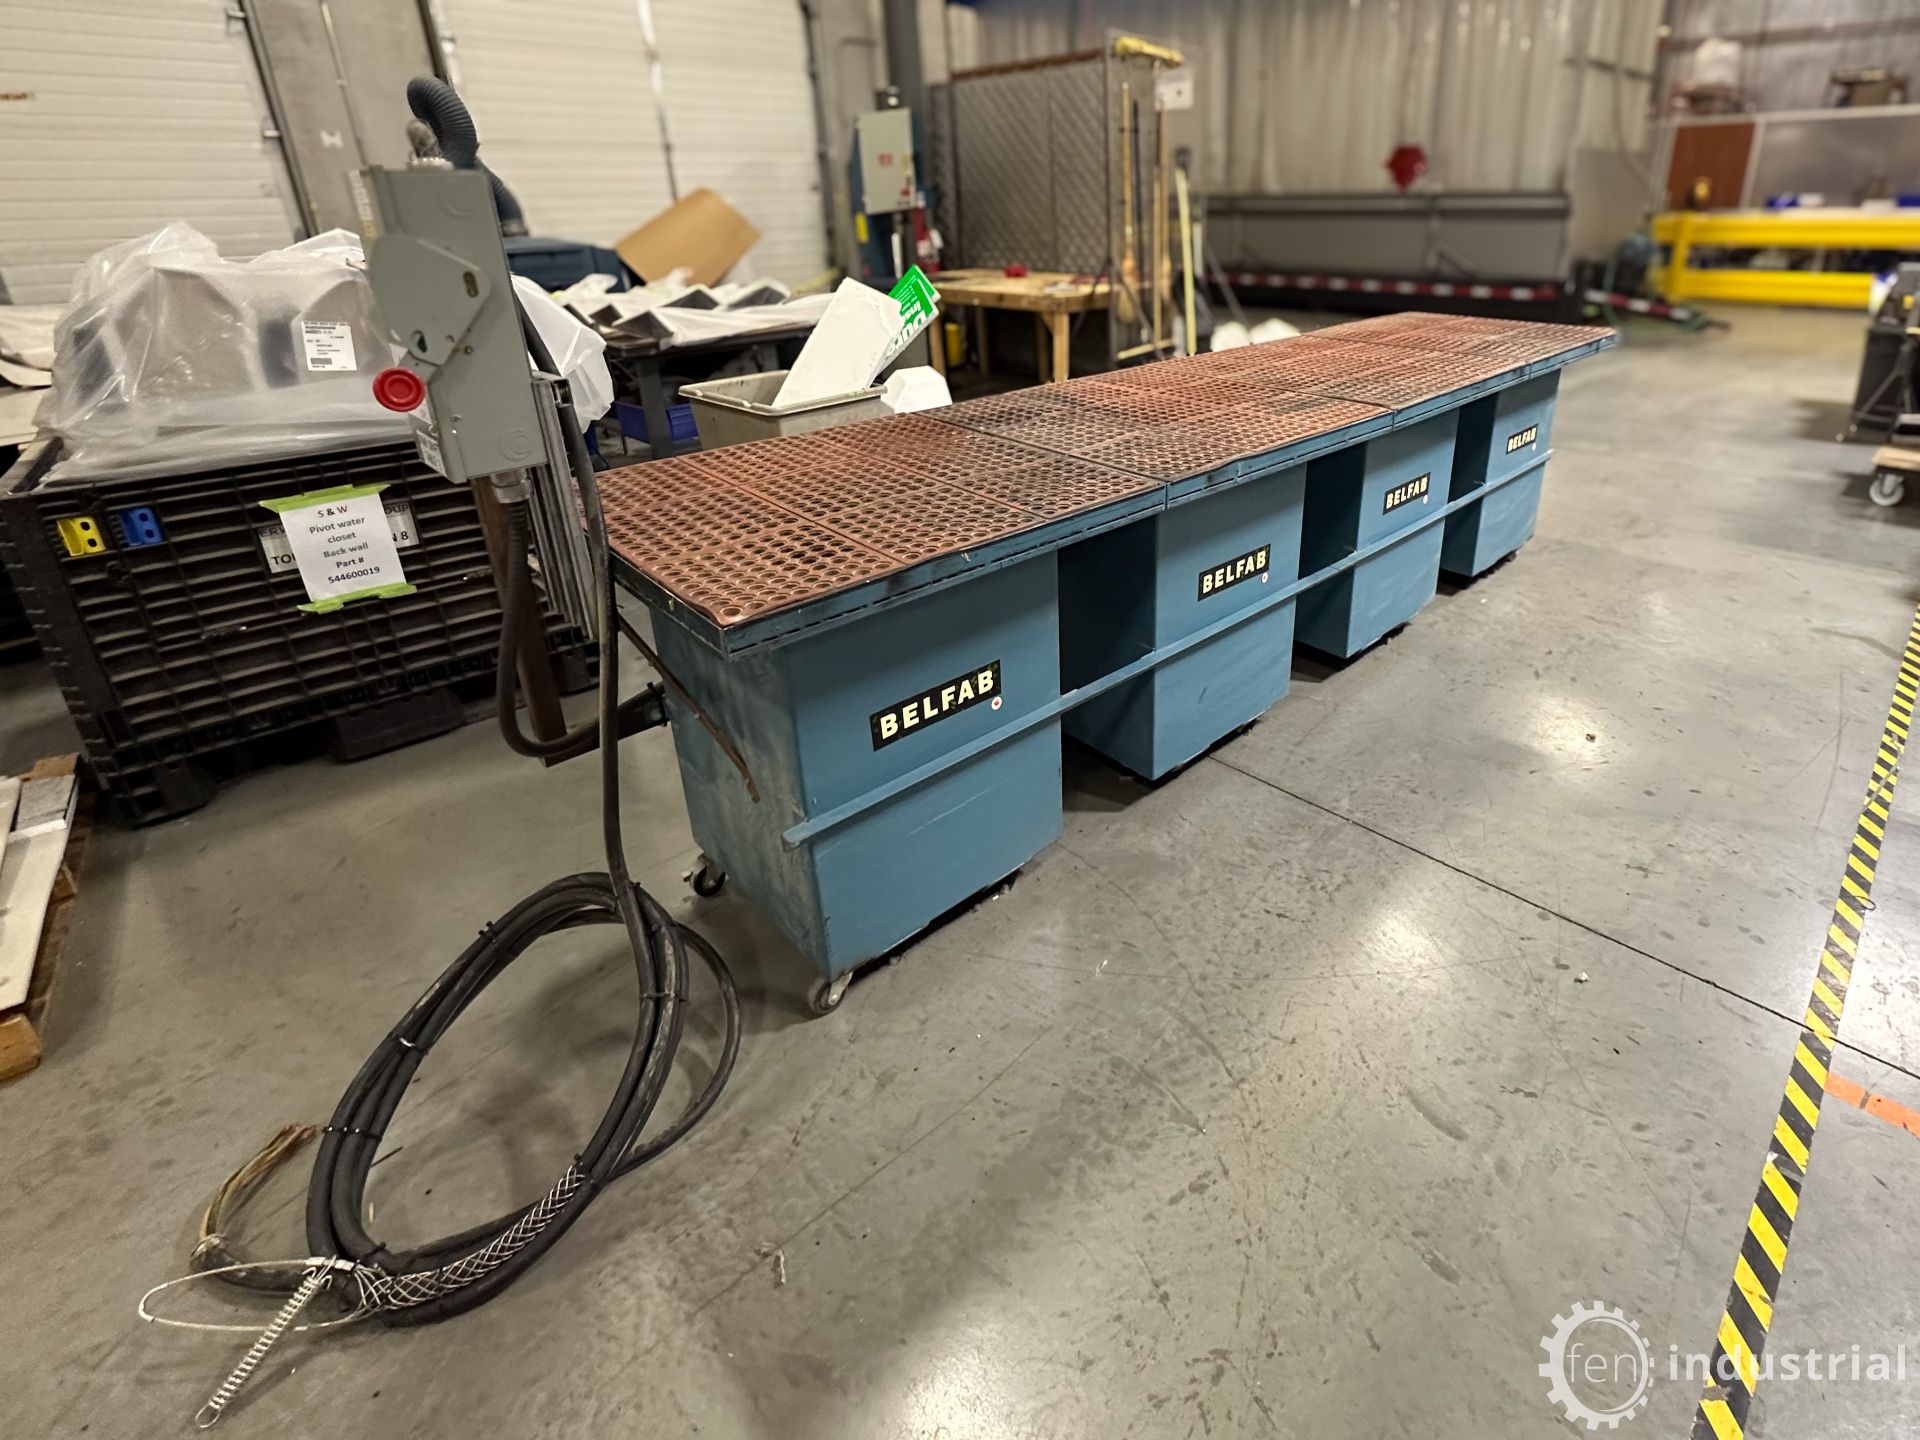 2007 PYRADIA BELFAB PORTABLE DOWNDRAFT TABLE SYSTEM CONSISTING OF (4) PYRADIA BELFAB 3636 DT